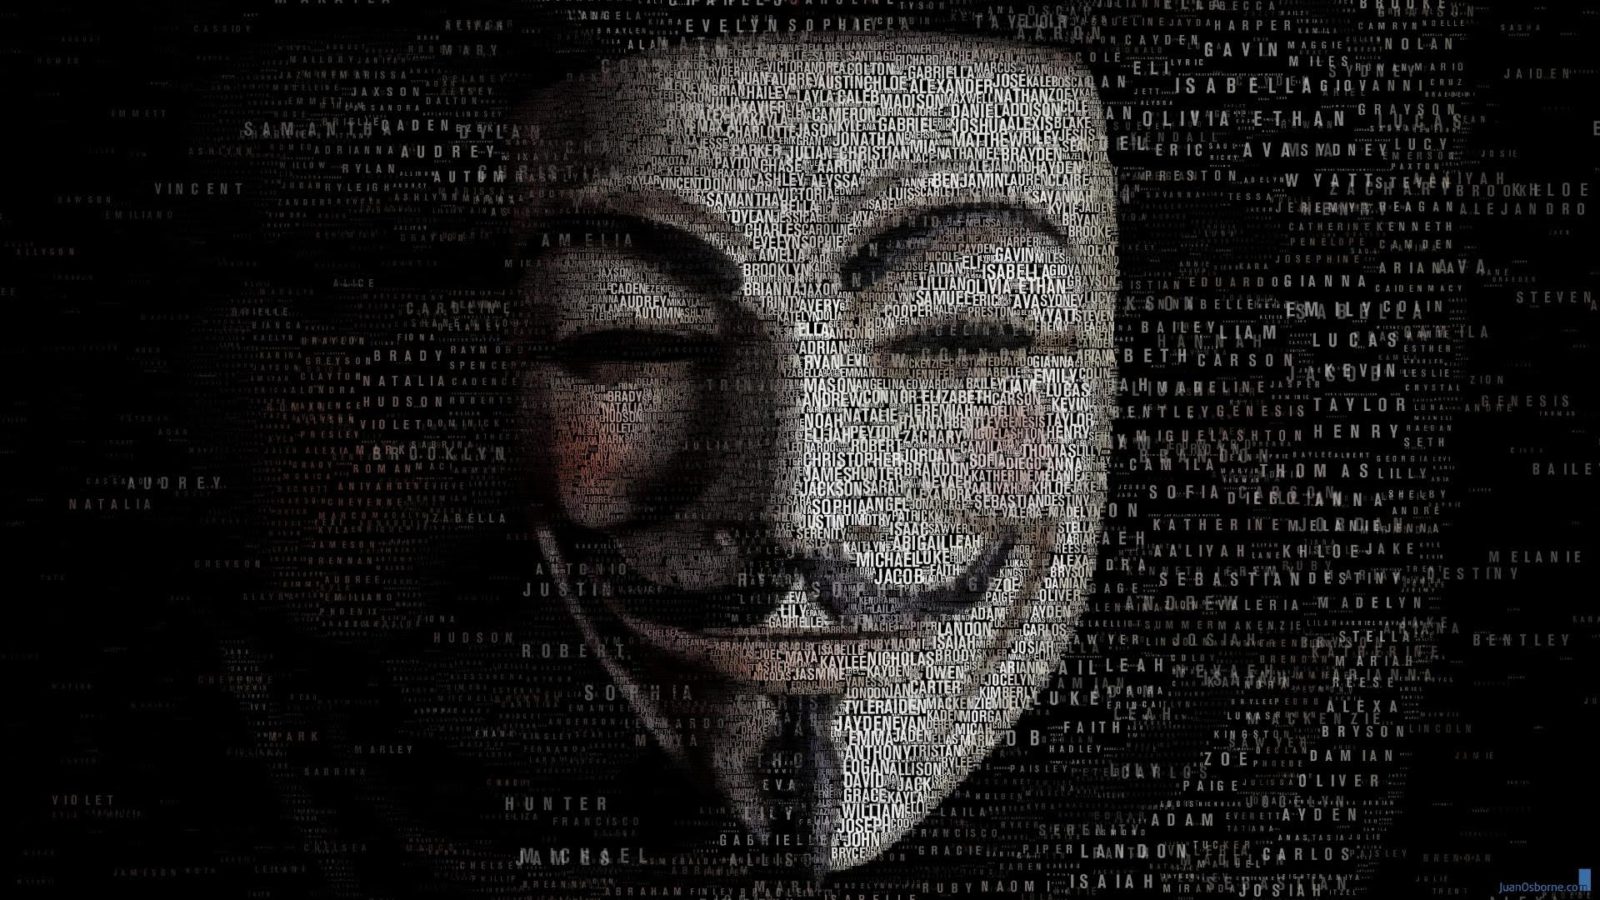 Documentaire: We are legion: the story of the hacktivists